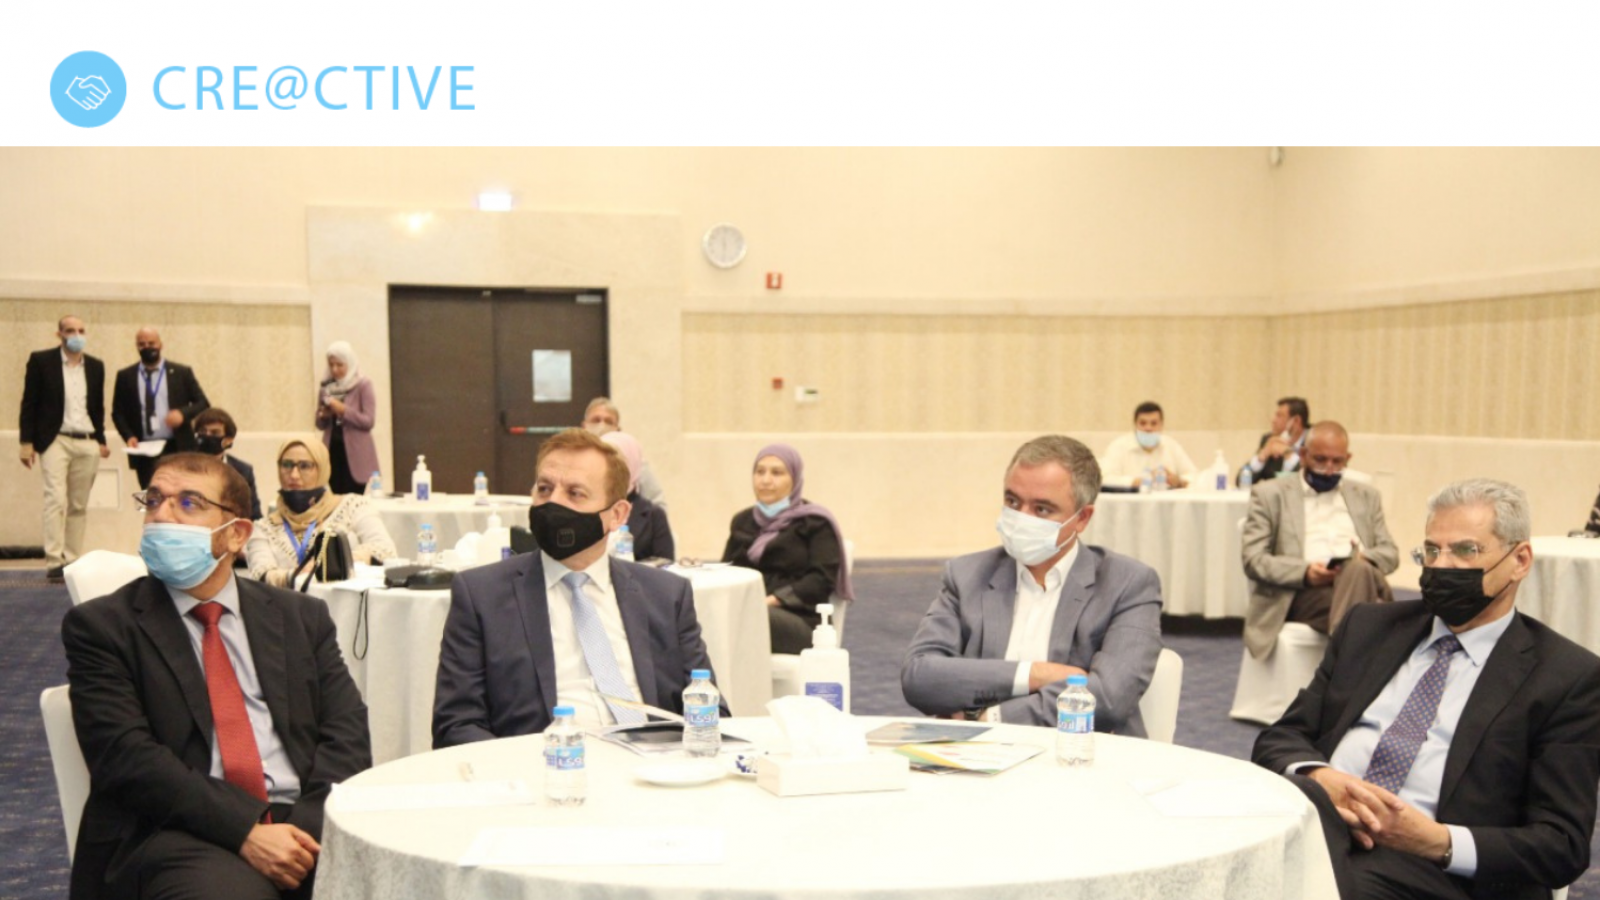 dybde apologi forfatter CRE@CTIVE - Jordan: The Higher Council for Science and Technology organized  an open day on youth employment opportunities | ENI CBC Med